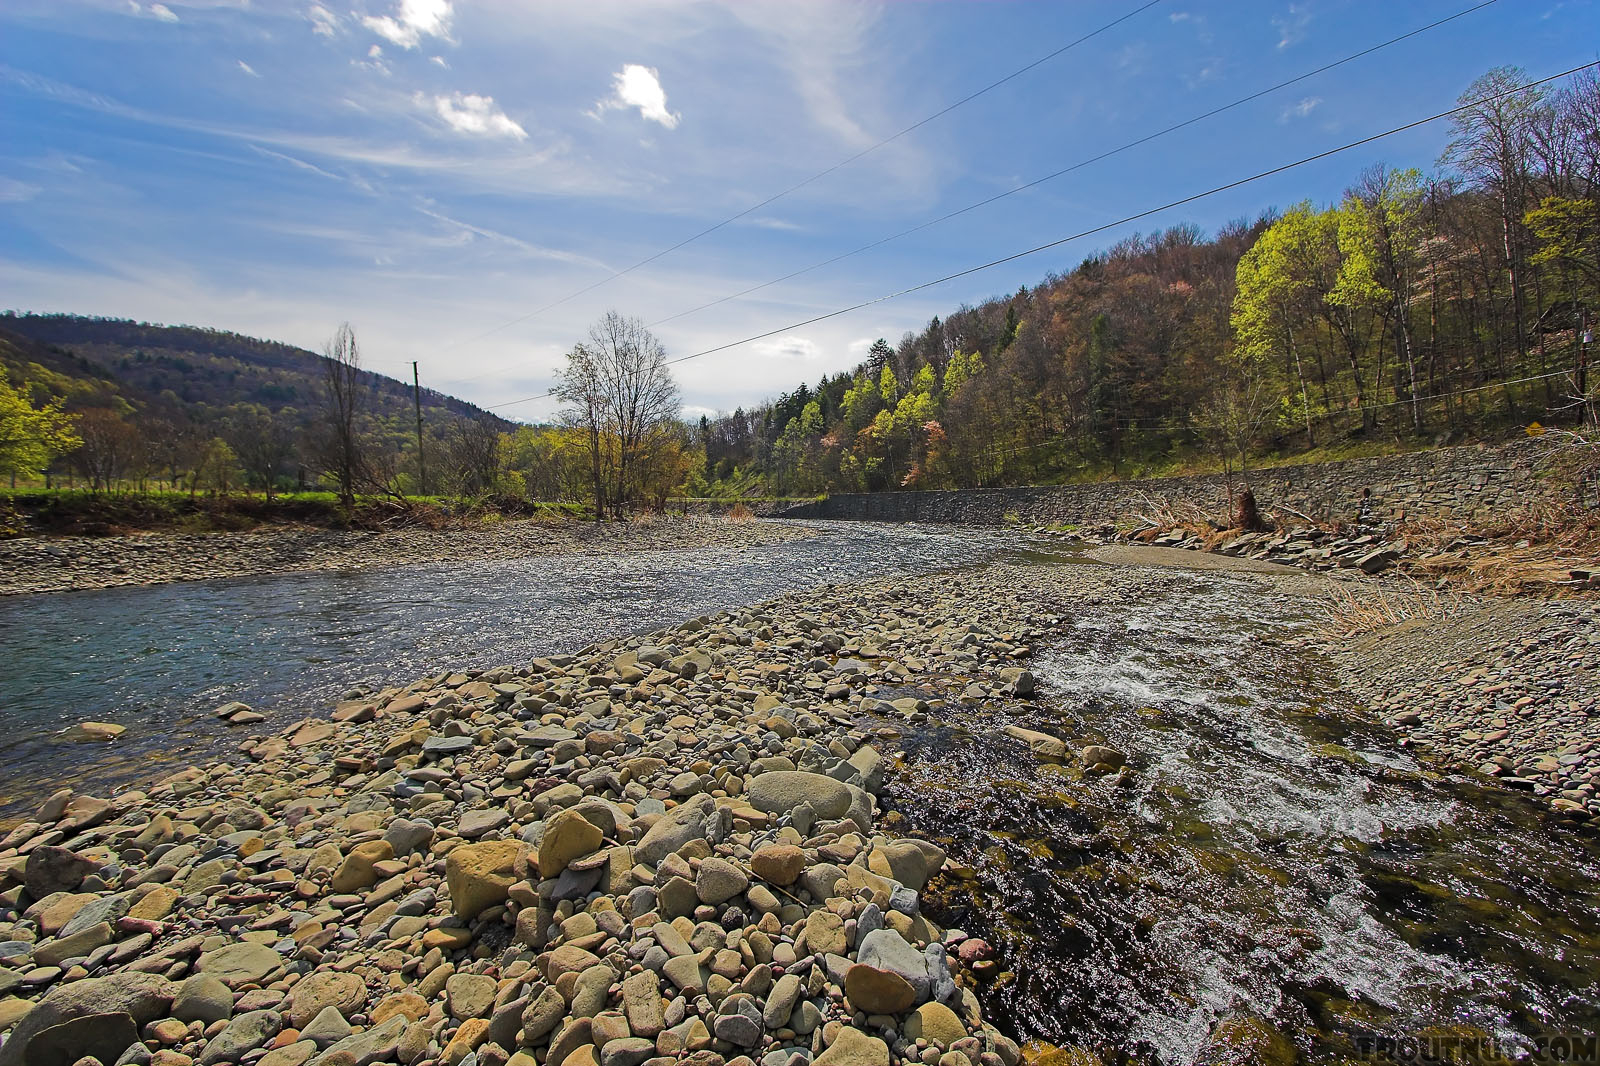 A swift tributary of a Catskill trout stream slides down its own high delta of boulders and cobble. From the Beaverkill River, Horton Bridge Pool in New York.